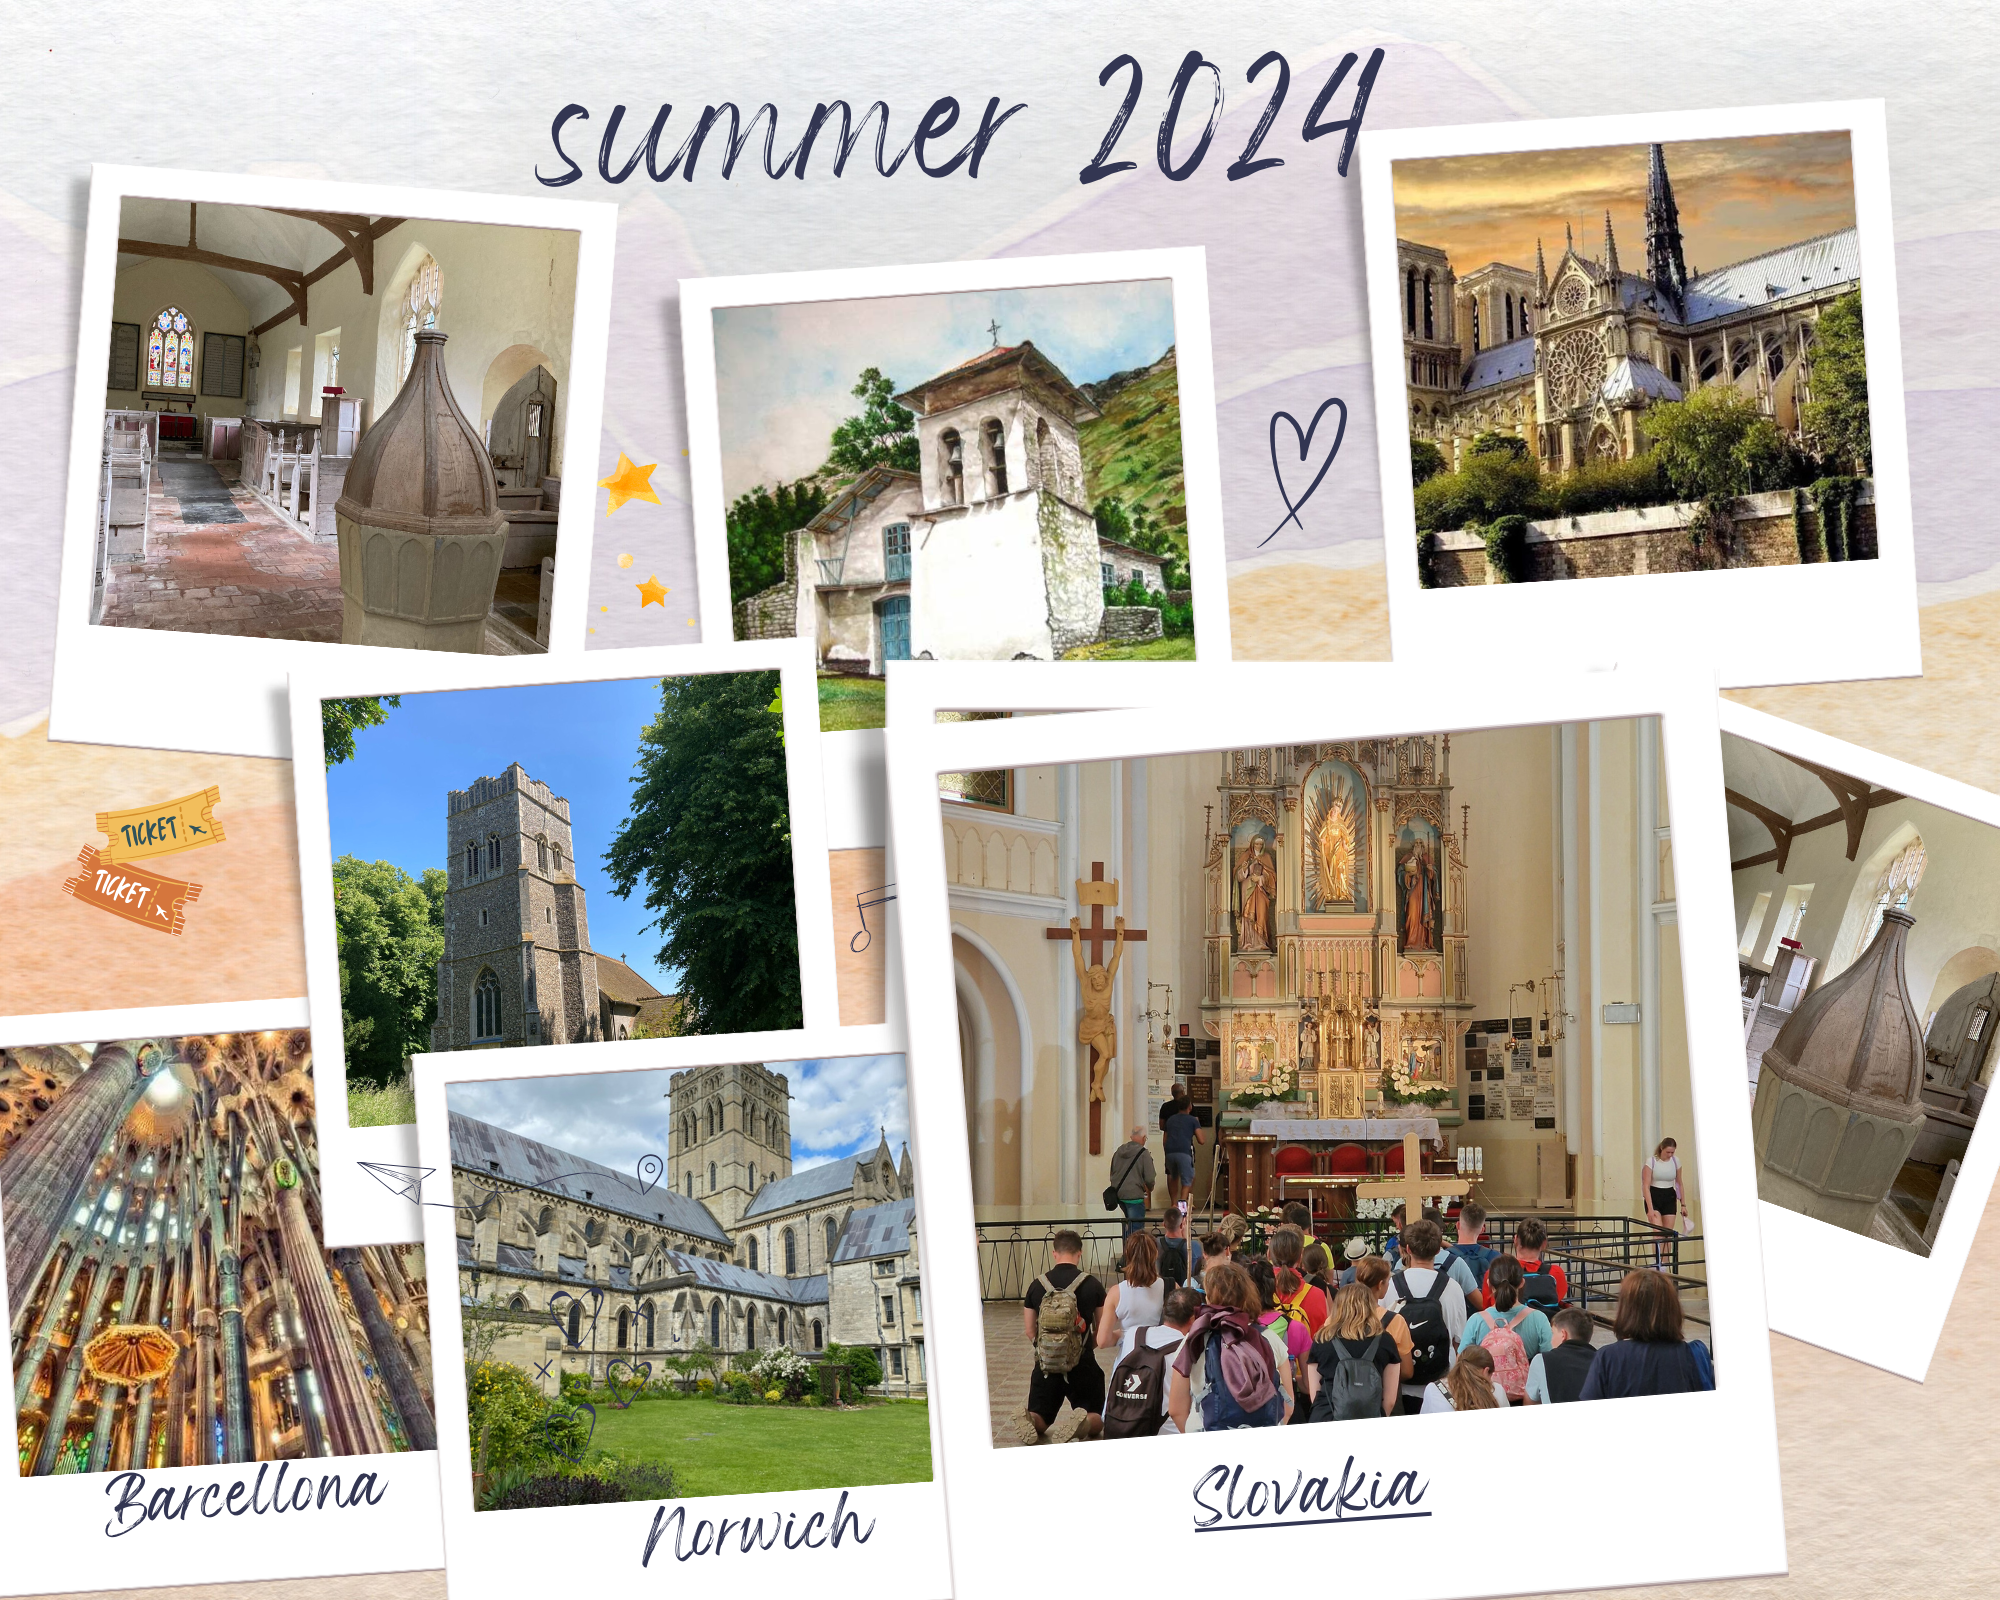 Share Your Faith Journey: Capturing Sacred Spaces This #Summer2024